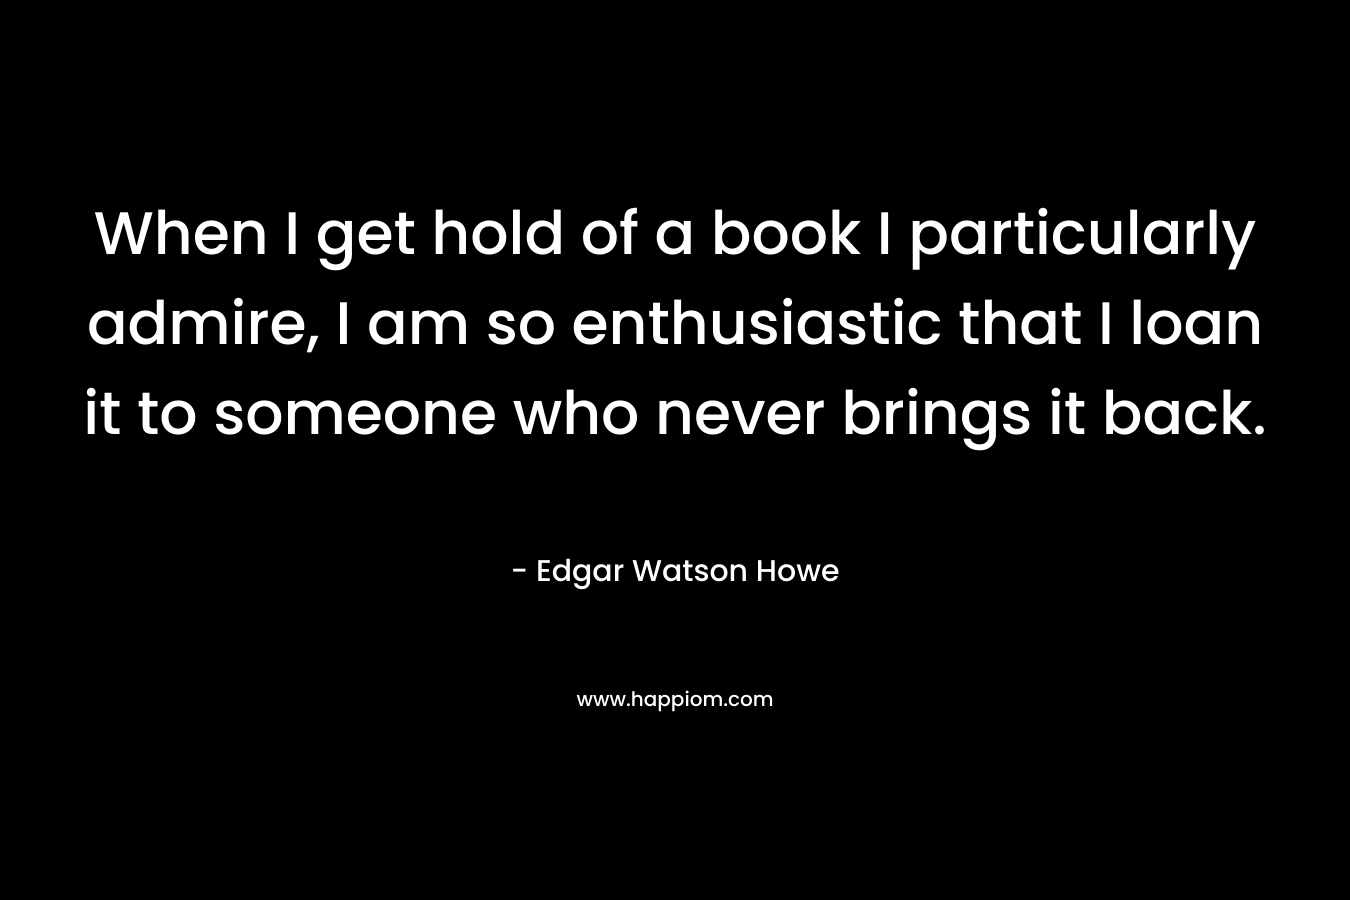 When I get hold of a book I particularly admire, I am so enthusiastic that I loan it to someone who never brings it back.